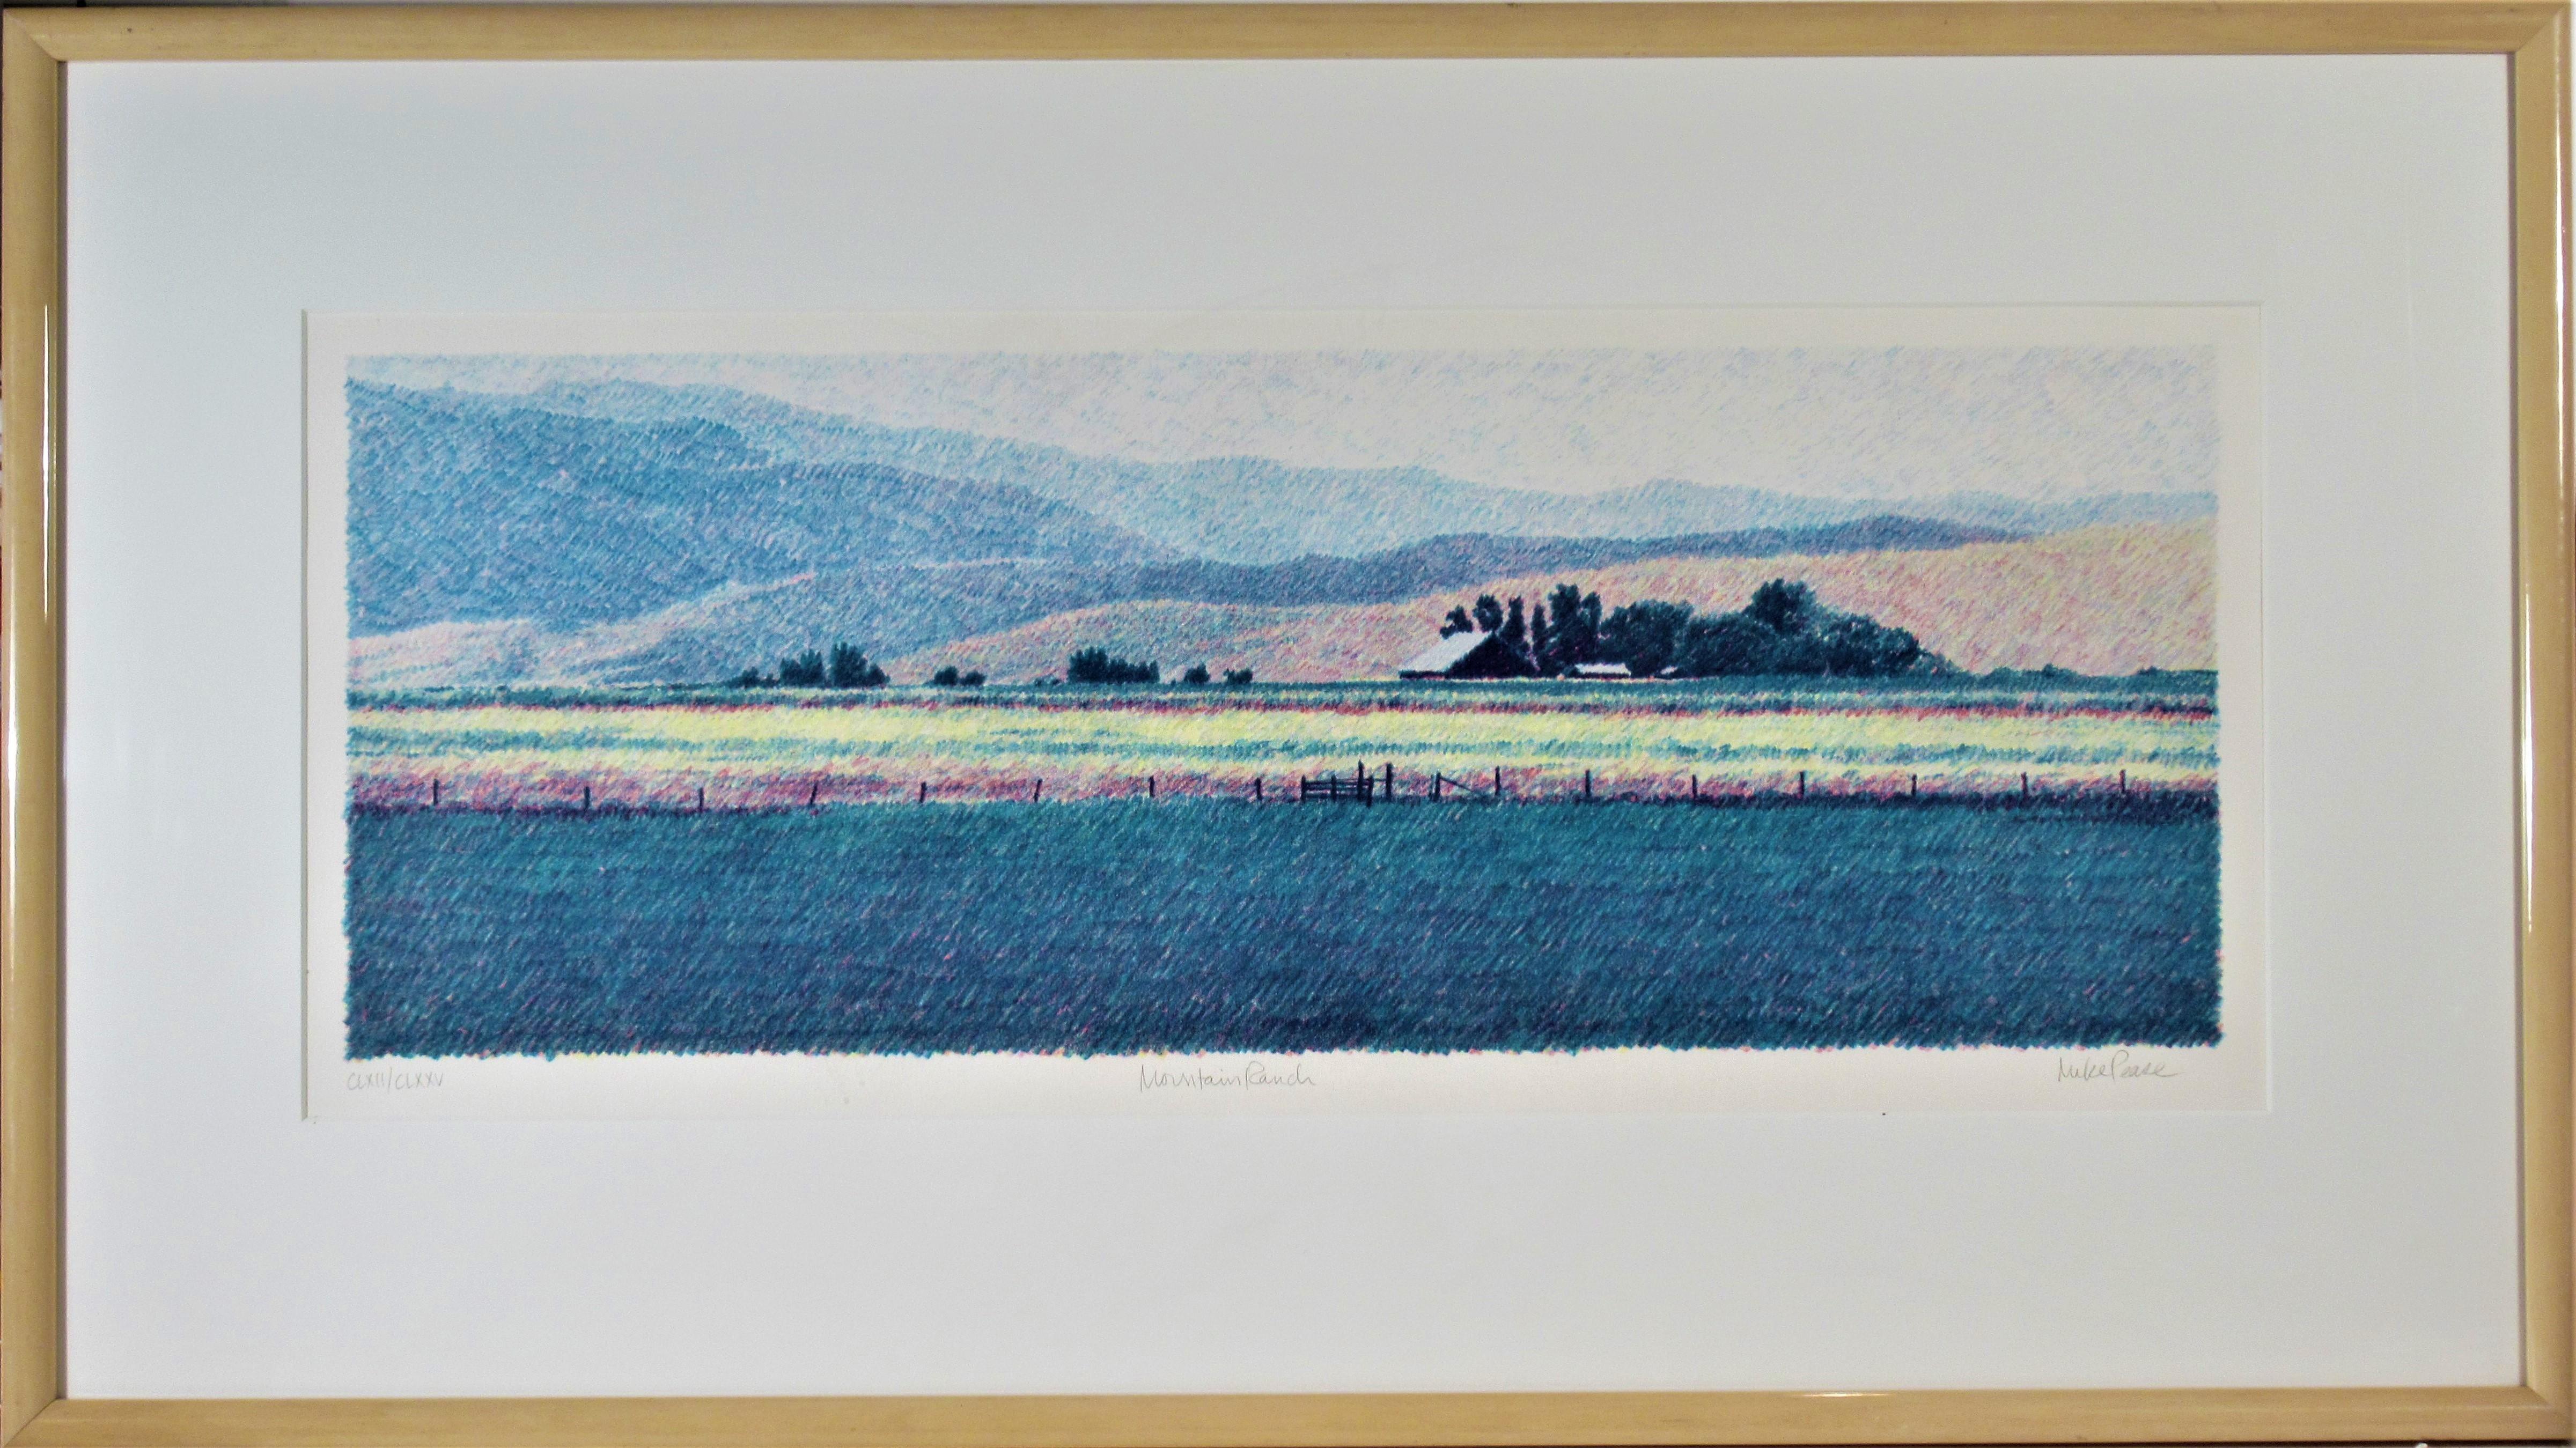 "Mountain Ranch" - Large color lithograph